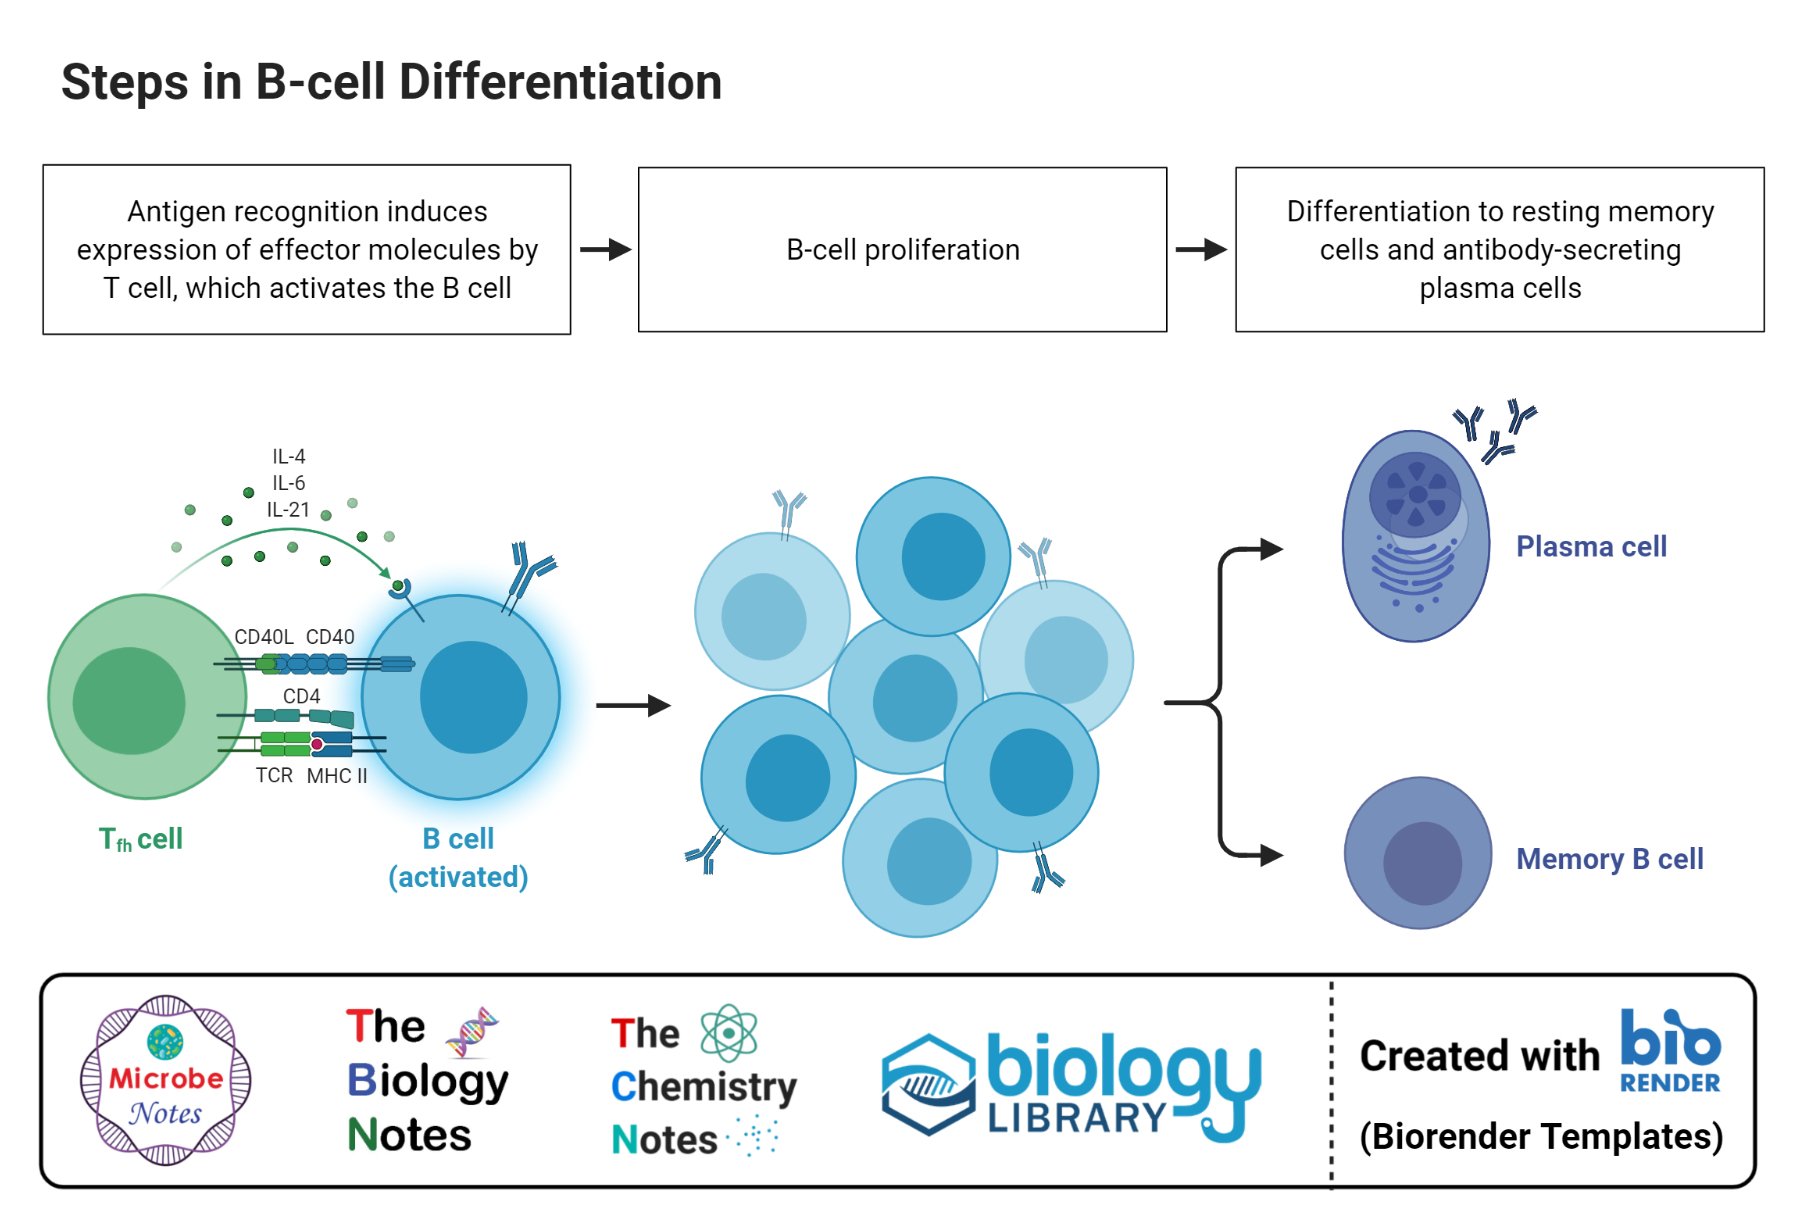 Differentiation of B cell